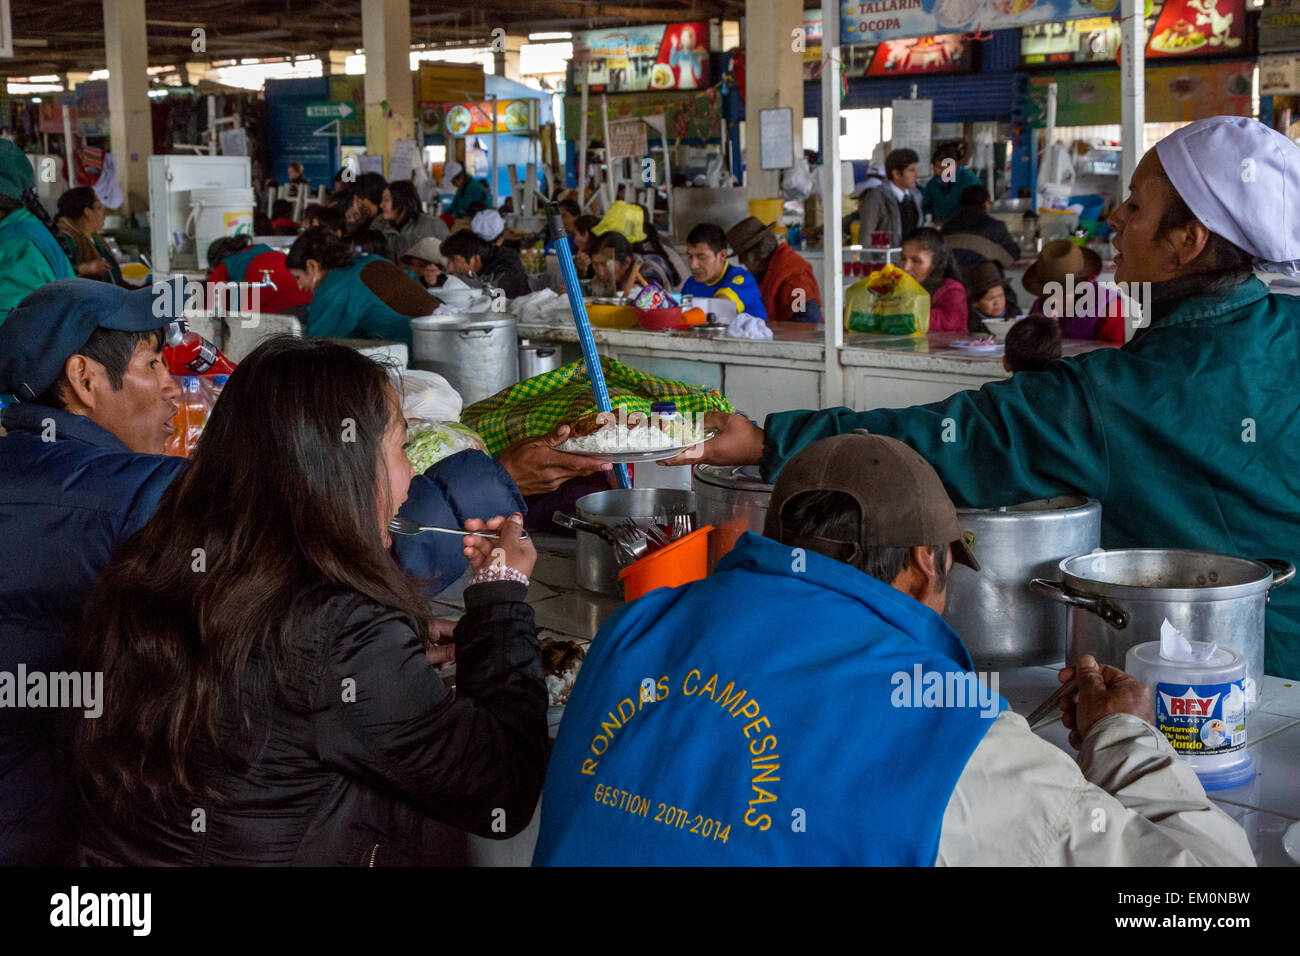 Peru, Cusco, San Pedro Market.  Cook Passing Lunch to a Customer Eating in the Food Court Area of the Market. Stock Photo